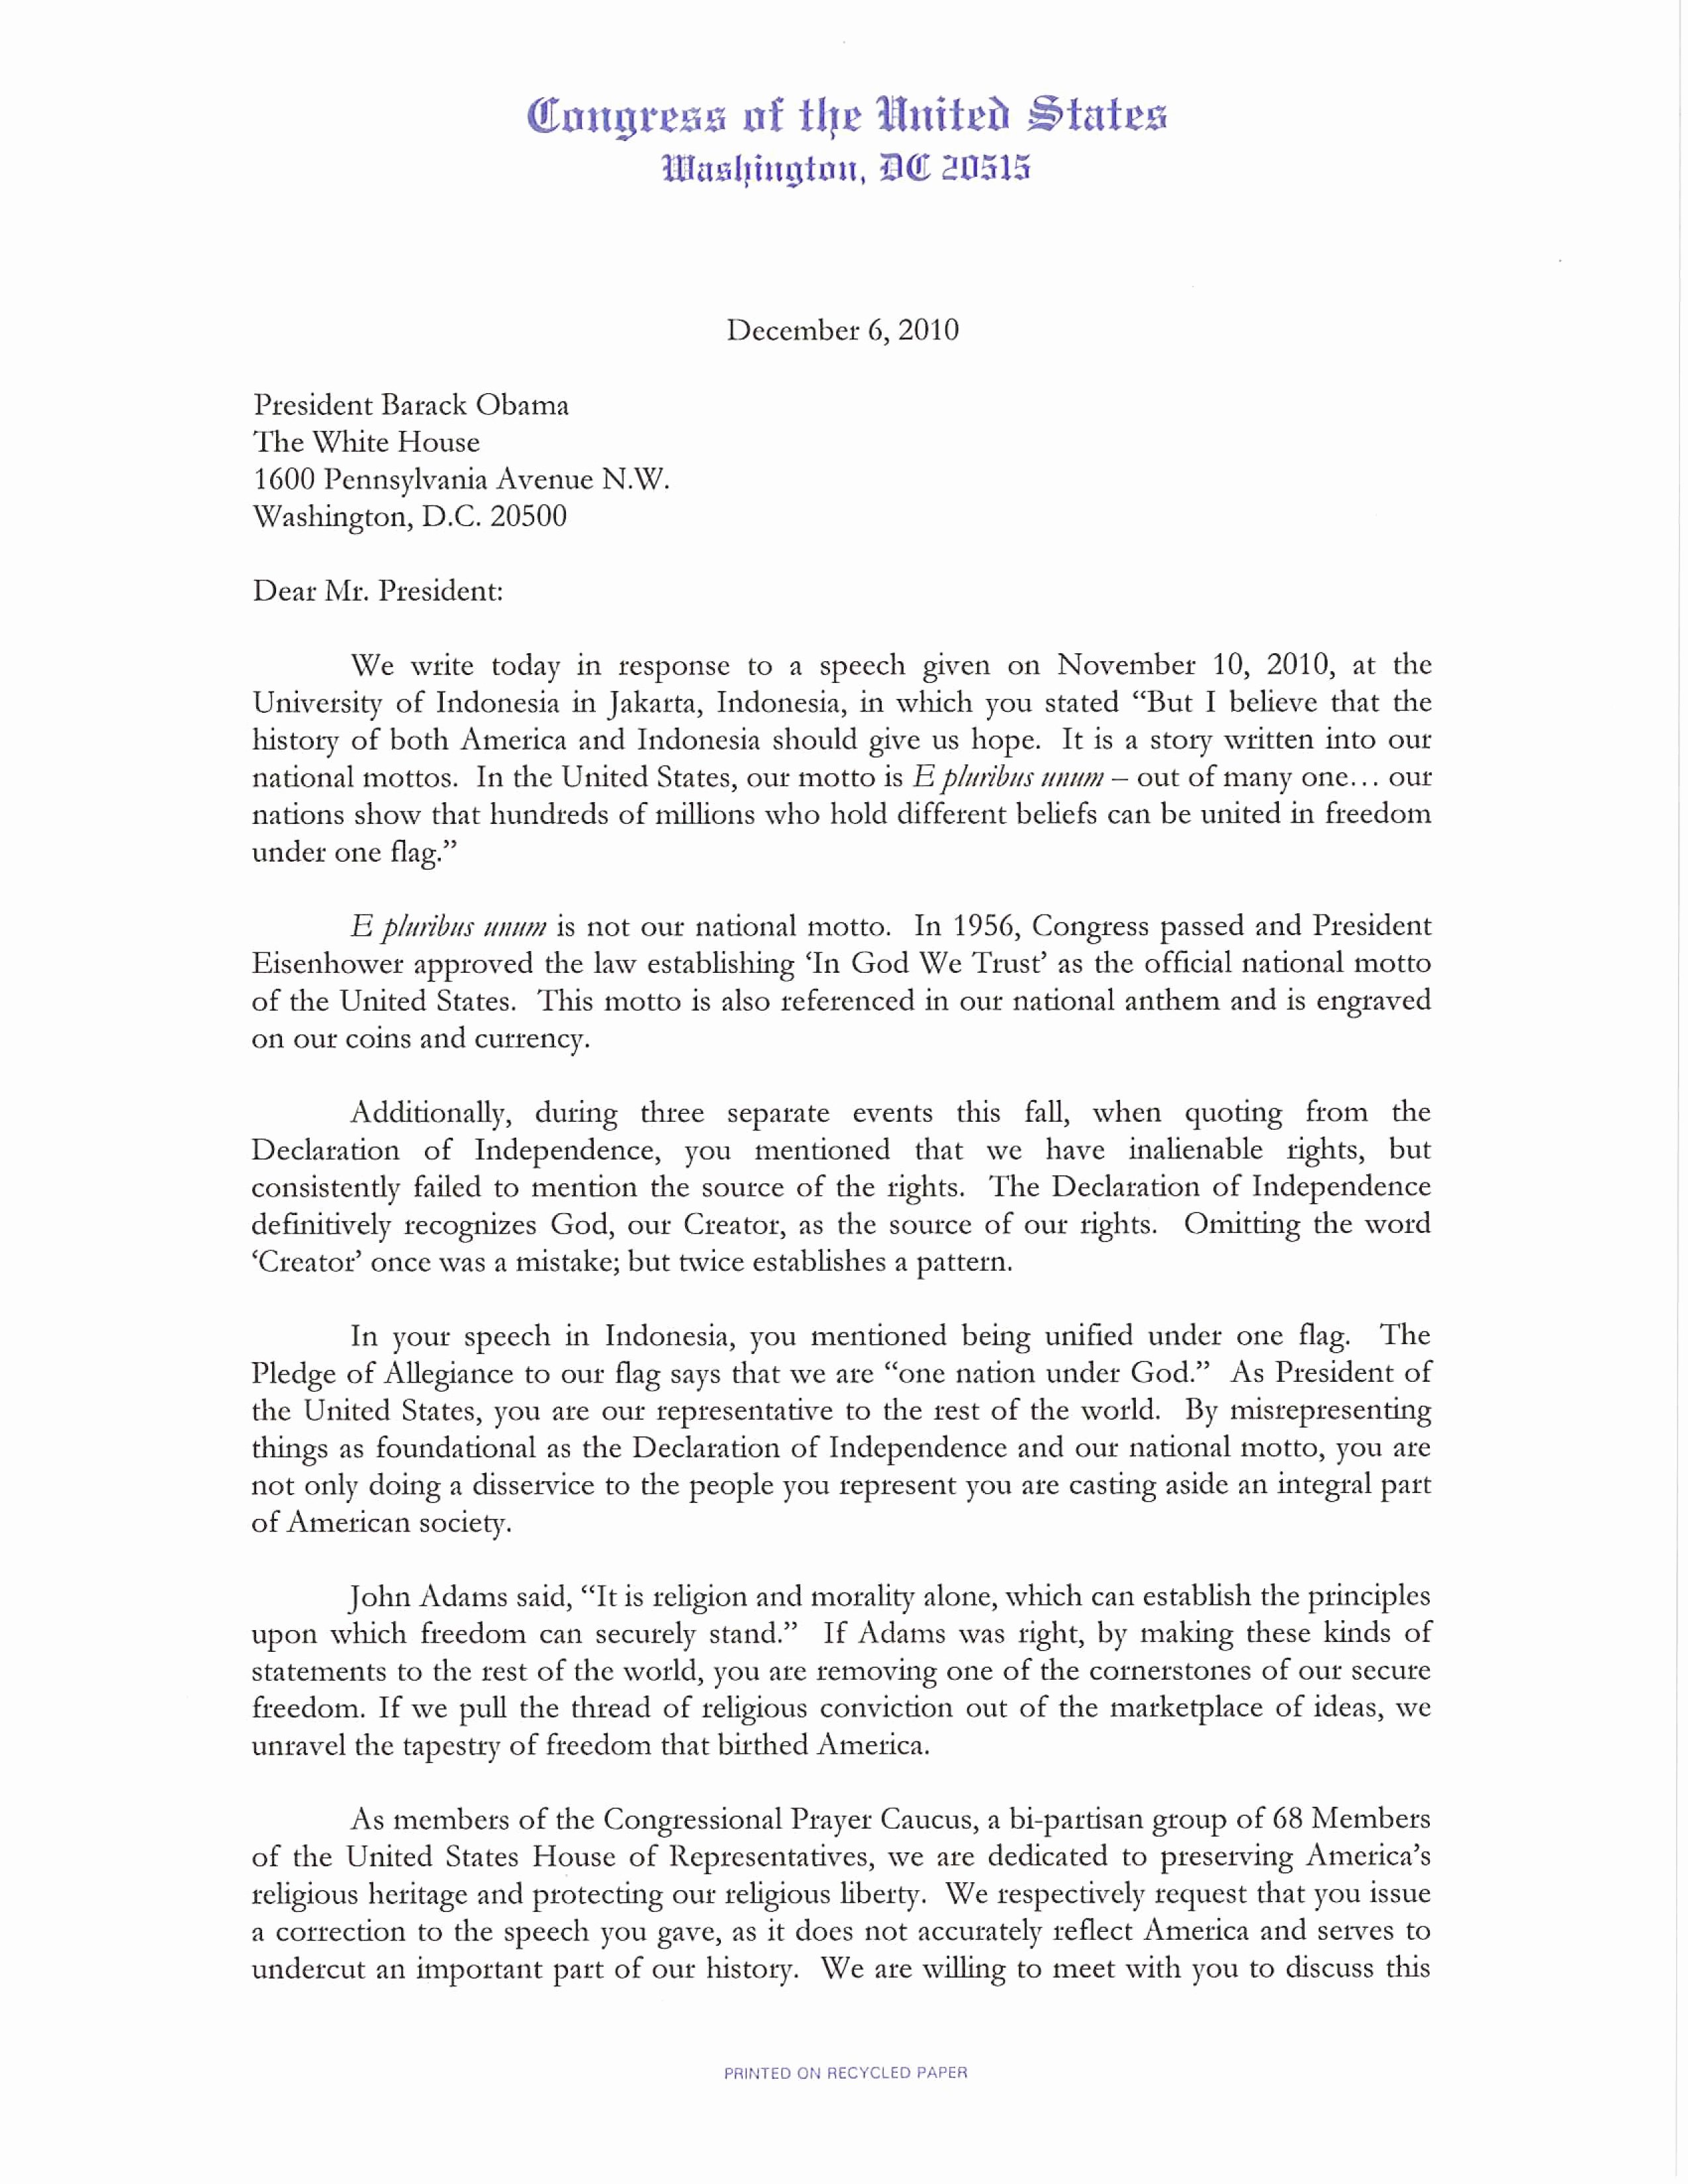 Letter to President format Beautiful Letter From Congress to Obama Demanding He “correct” His